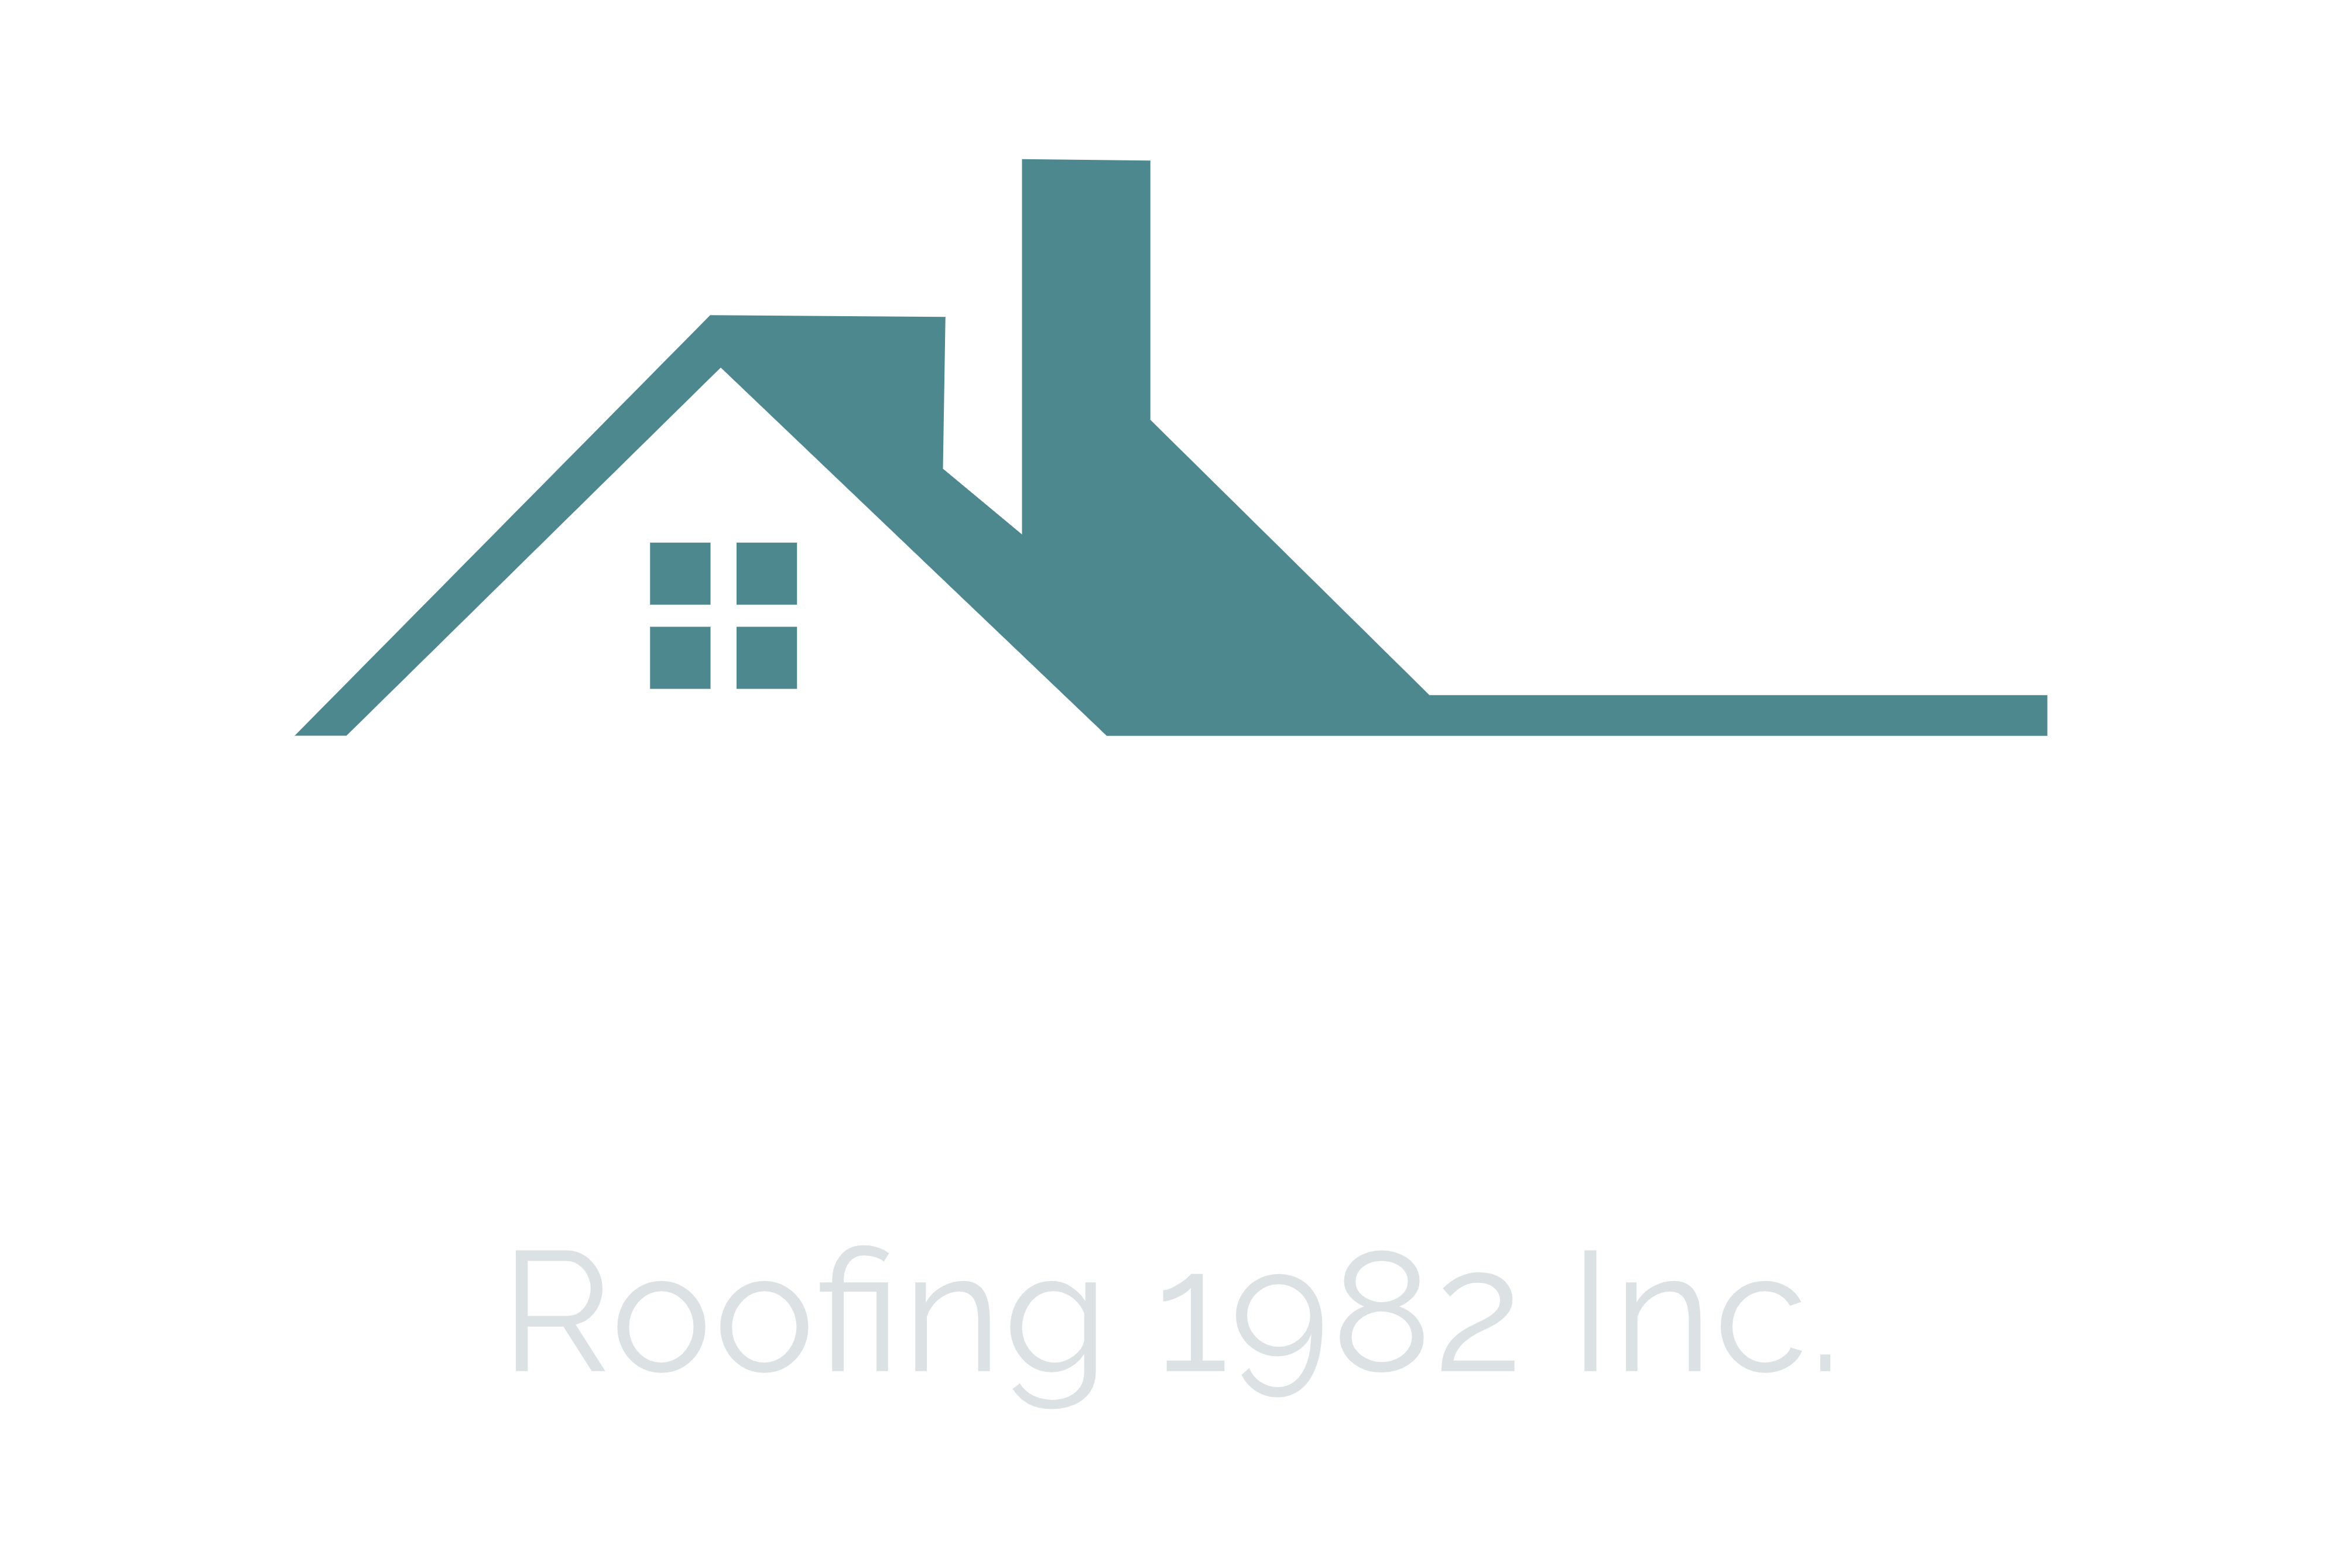 Mansfield Roofing 1982 Inc.